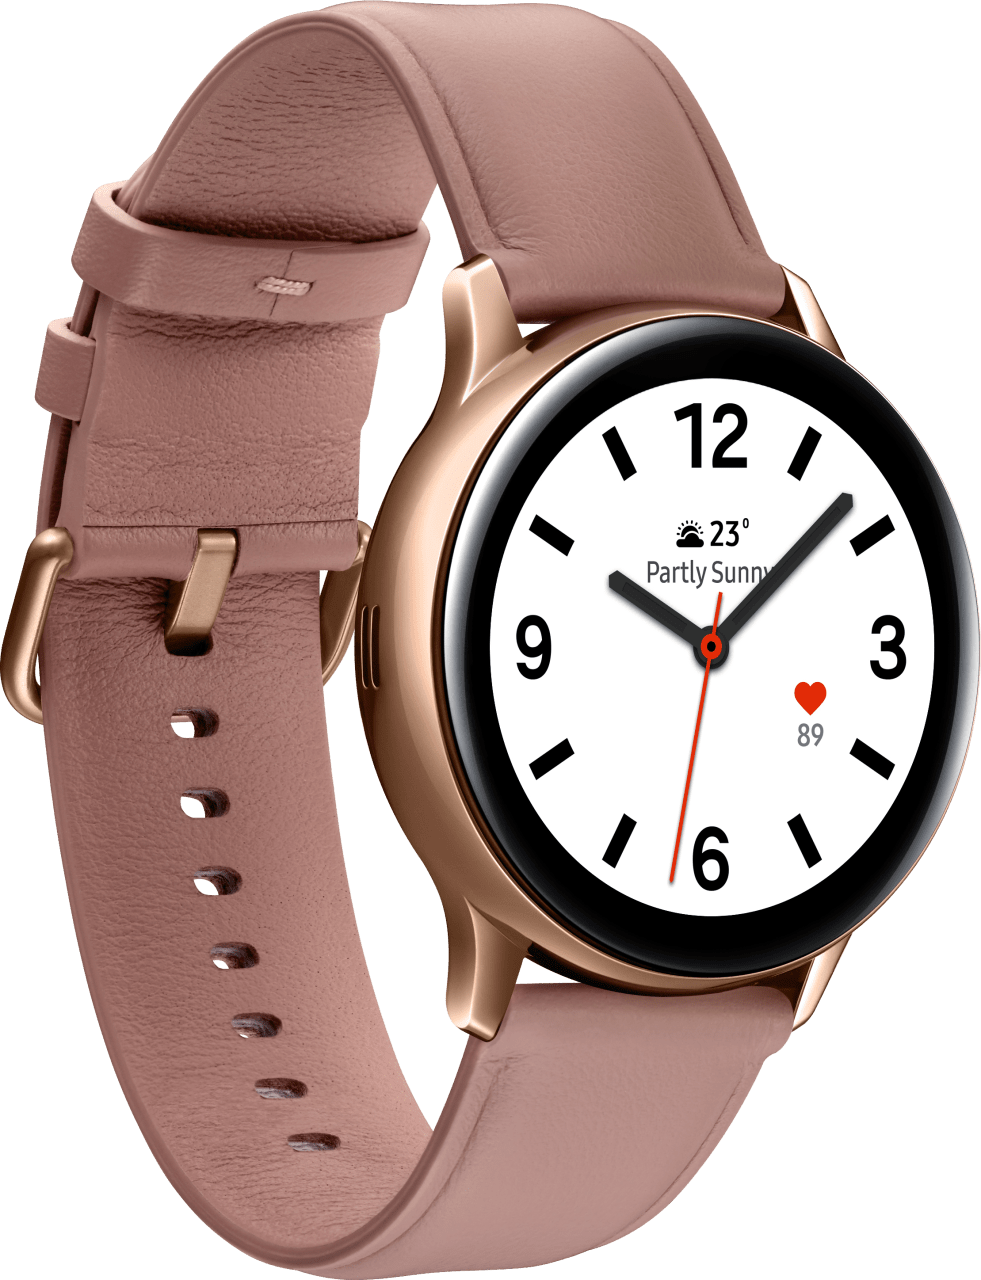 Oro Samsung Galaxy Watch Active2 (LTE), 40mm Stainless steel case, Leather band.2